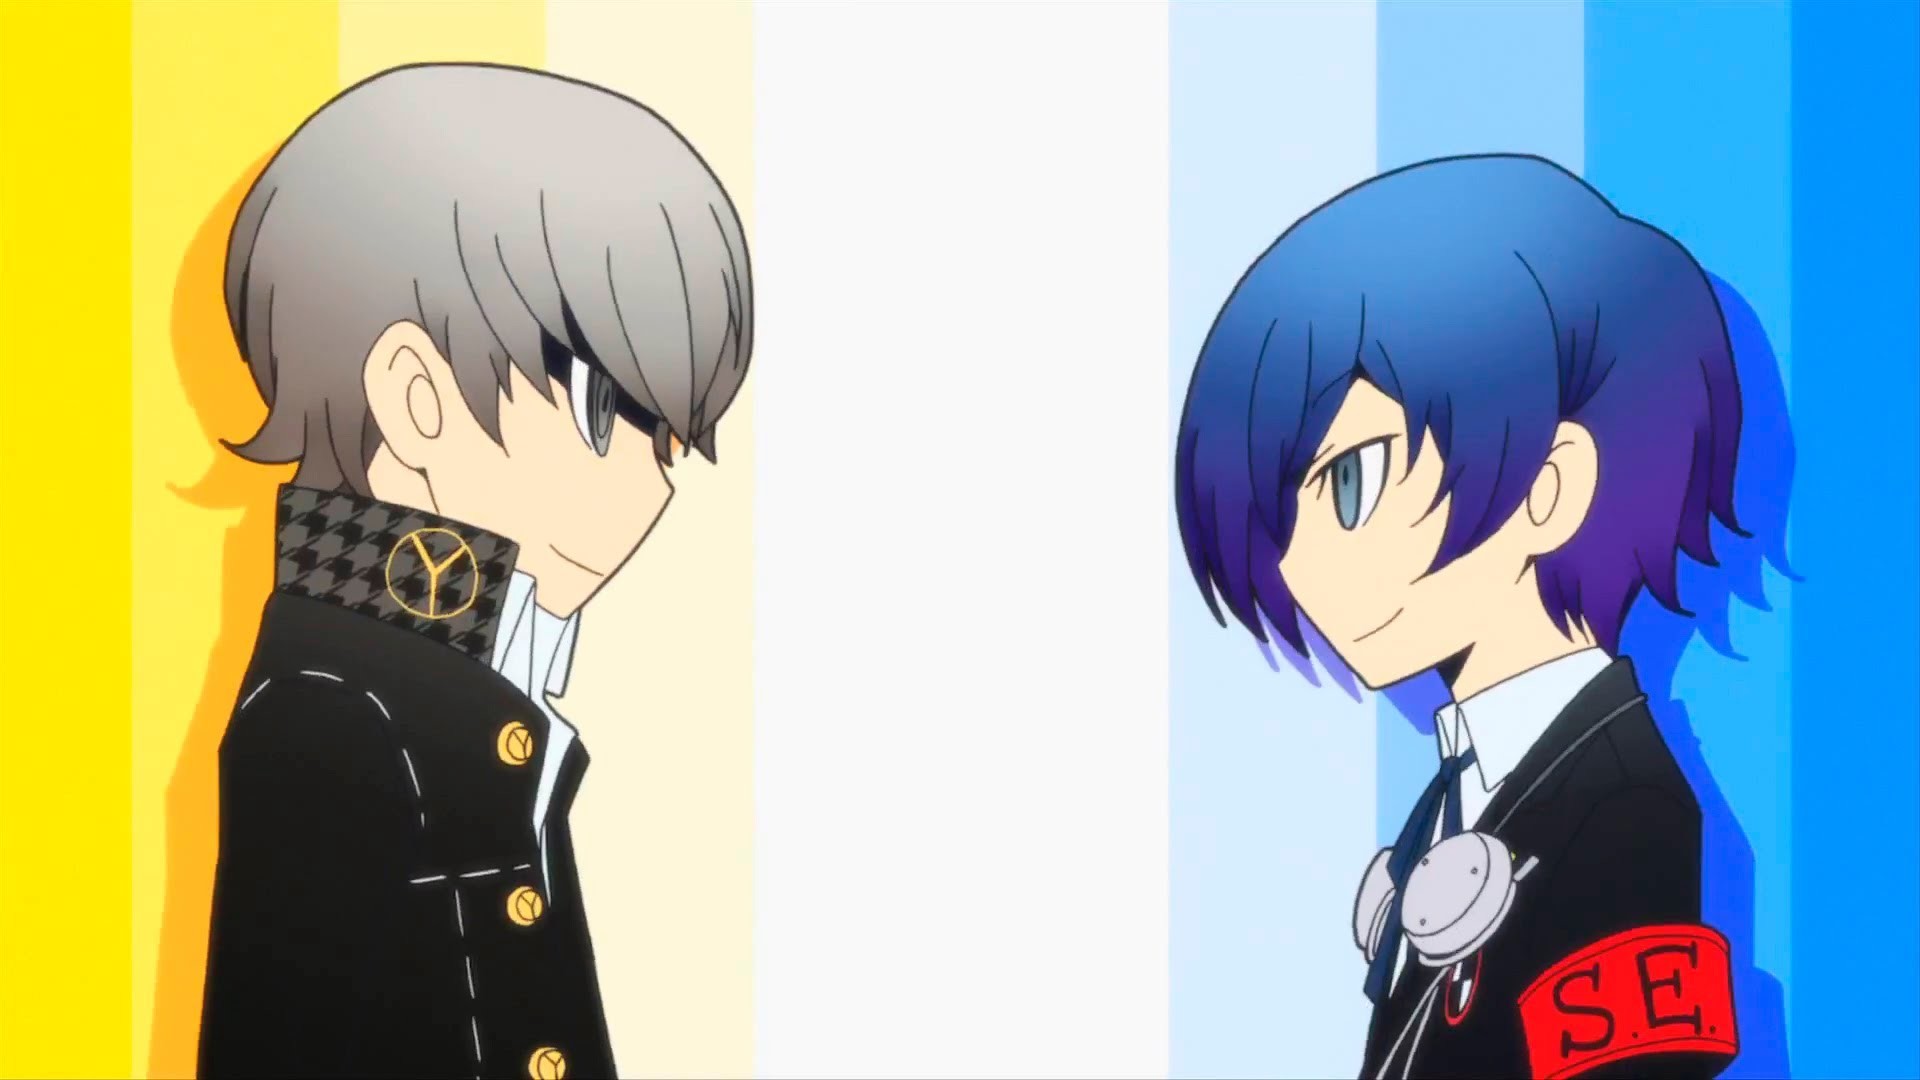 1920x1080 Persona Q: Shadow of the Labyrinth Third Trailer - Persona 3 Version